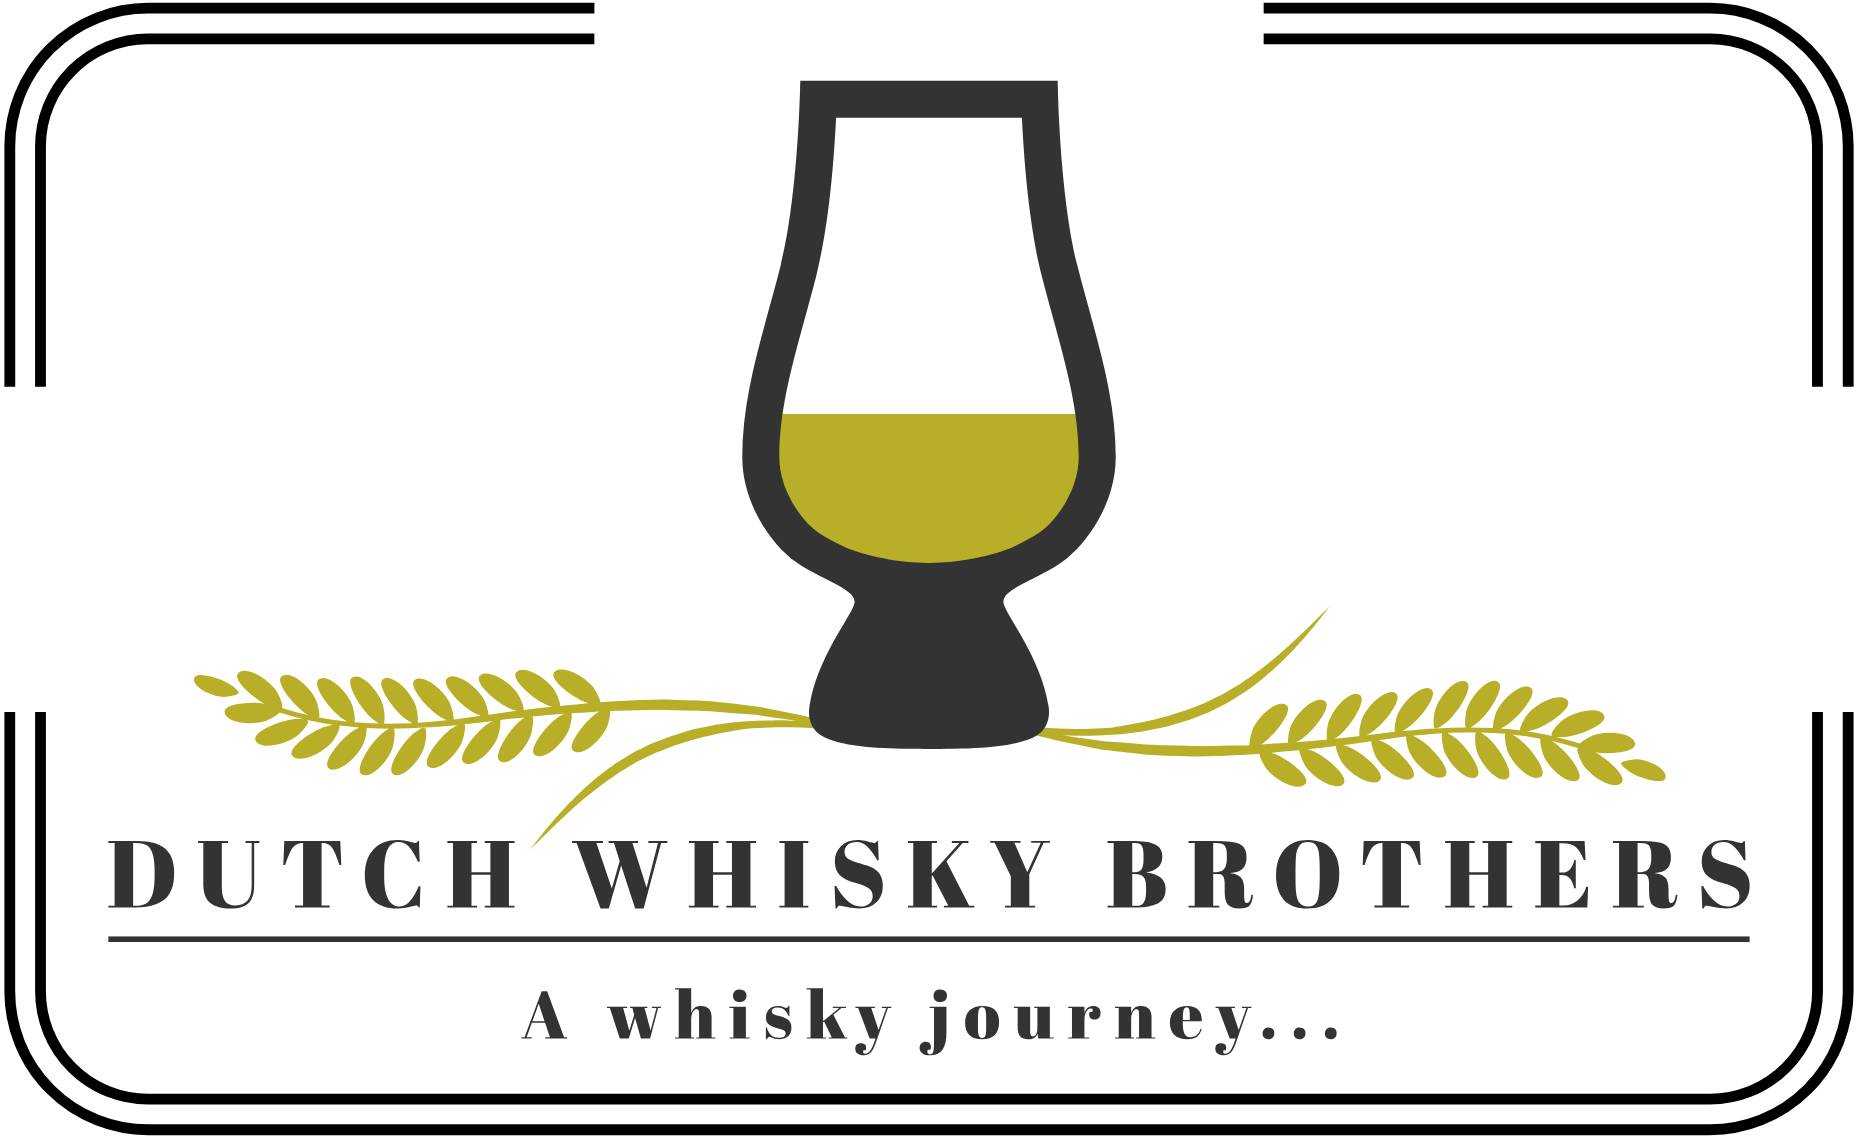 Dutch Whisky Brothers